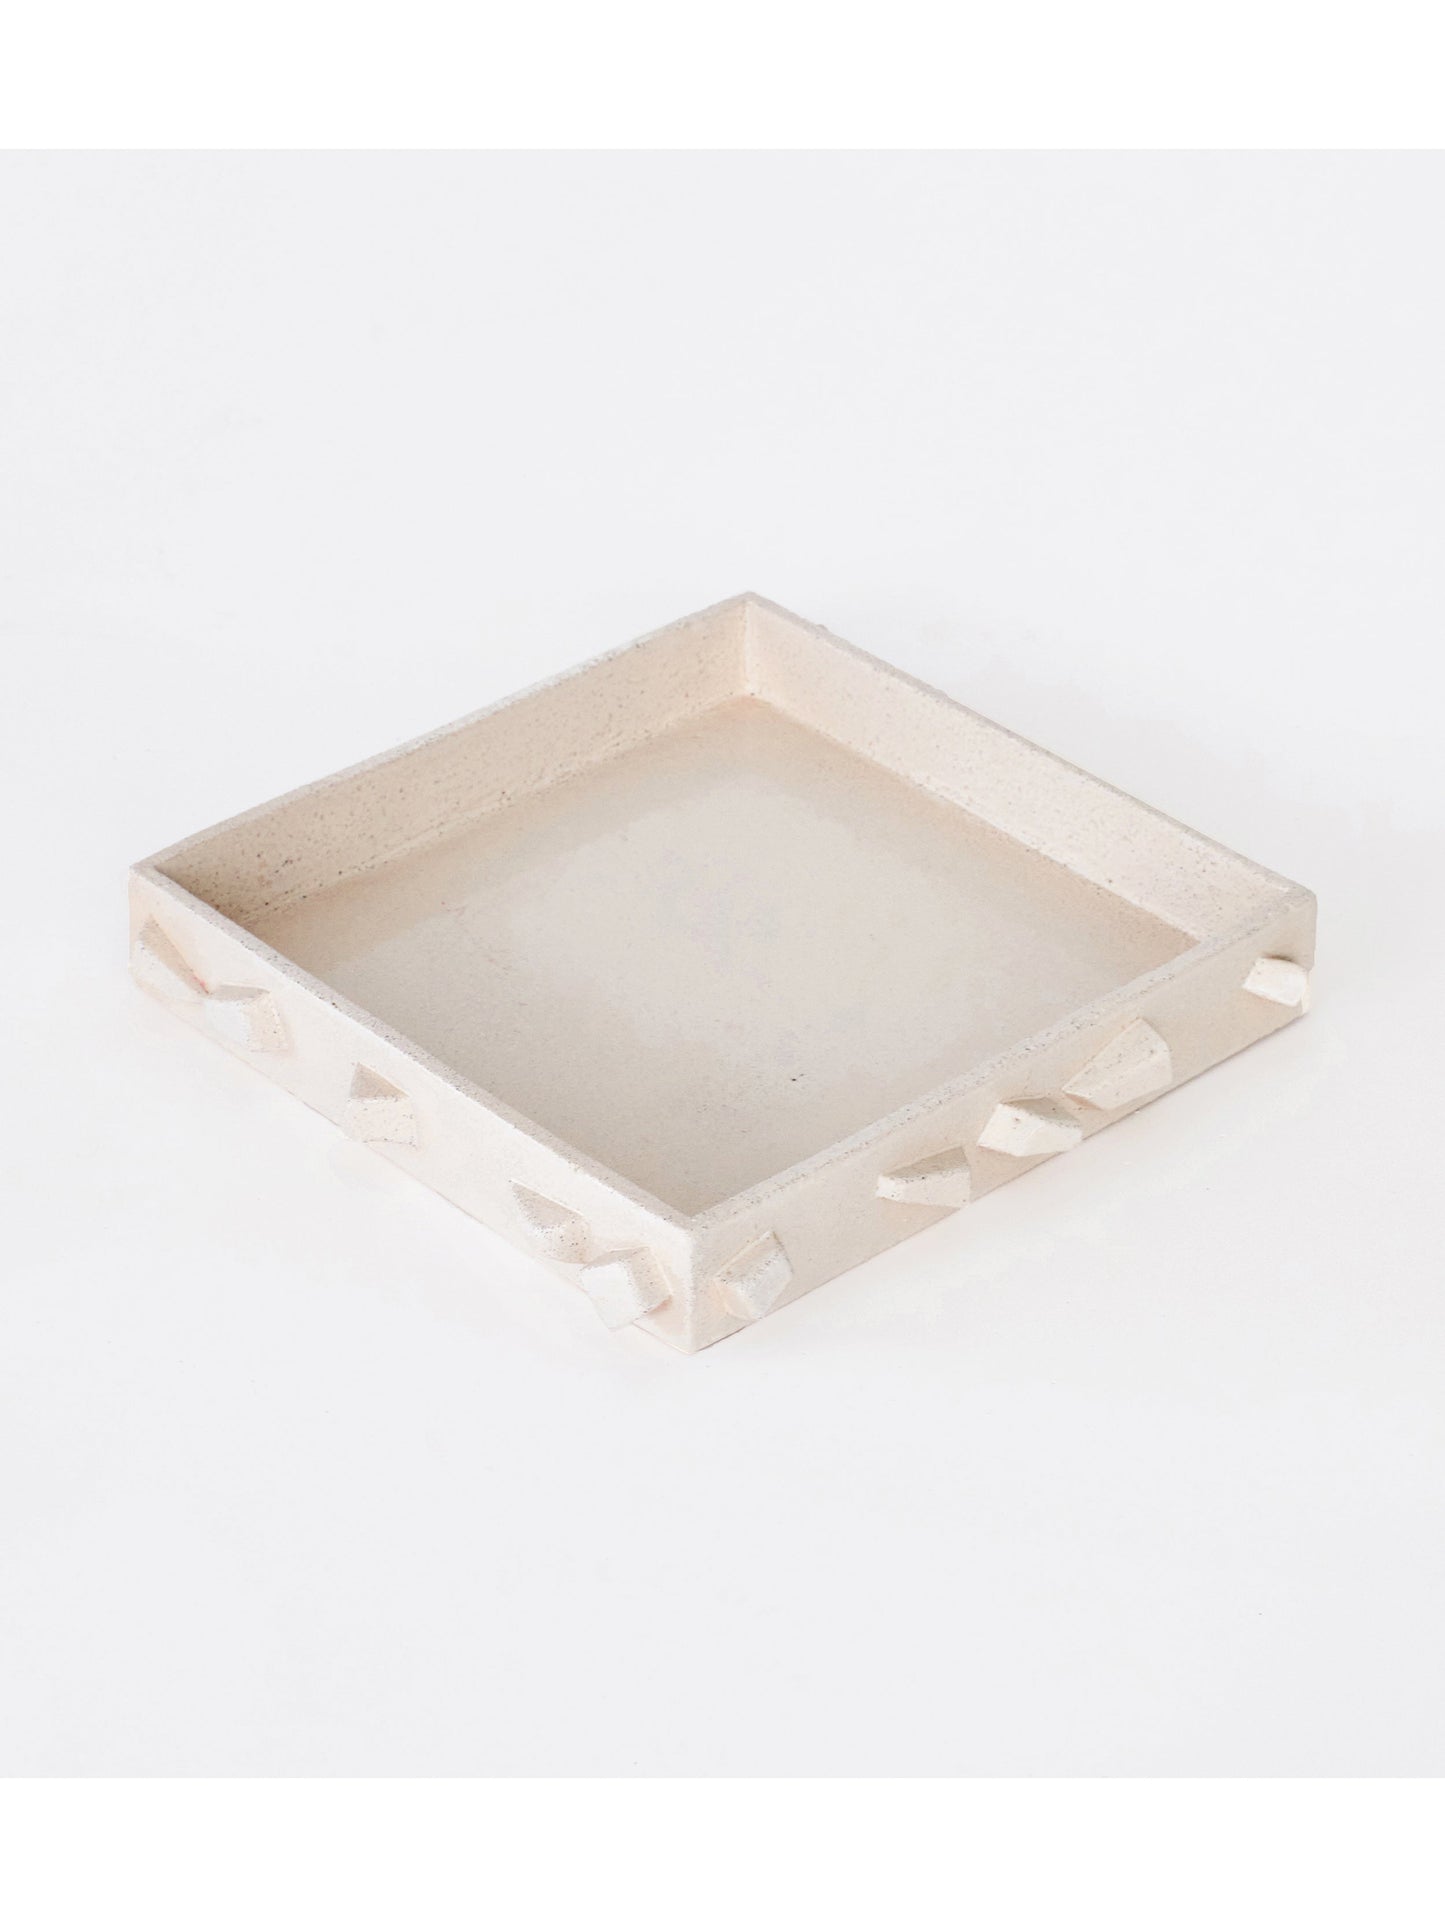 For Rachel' Tray - Large in Cream Trays